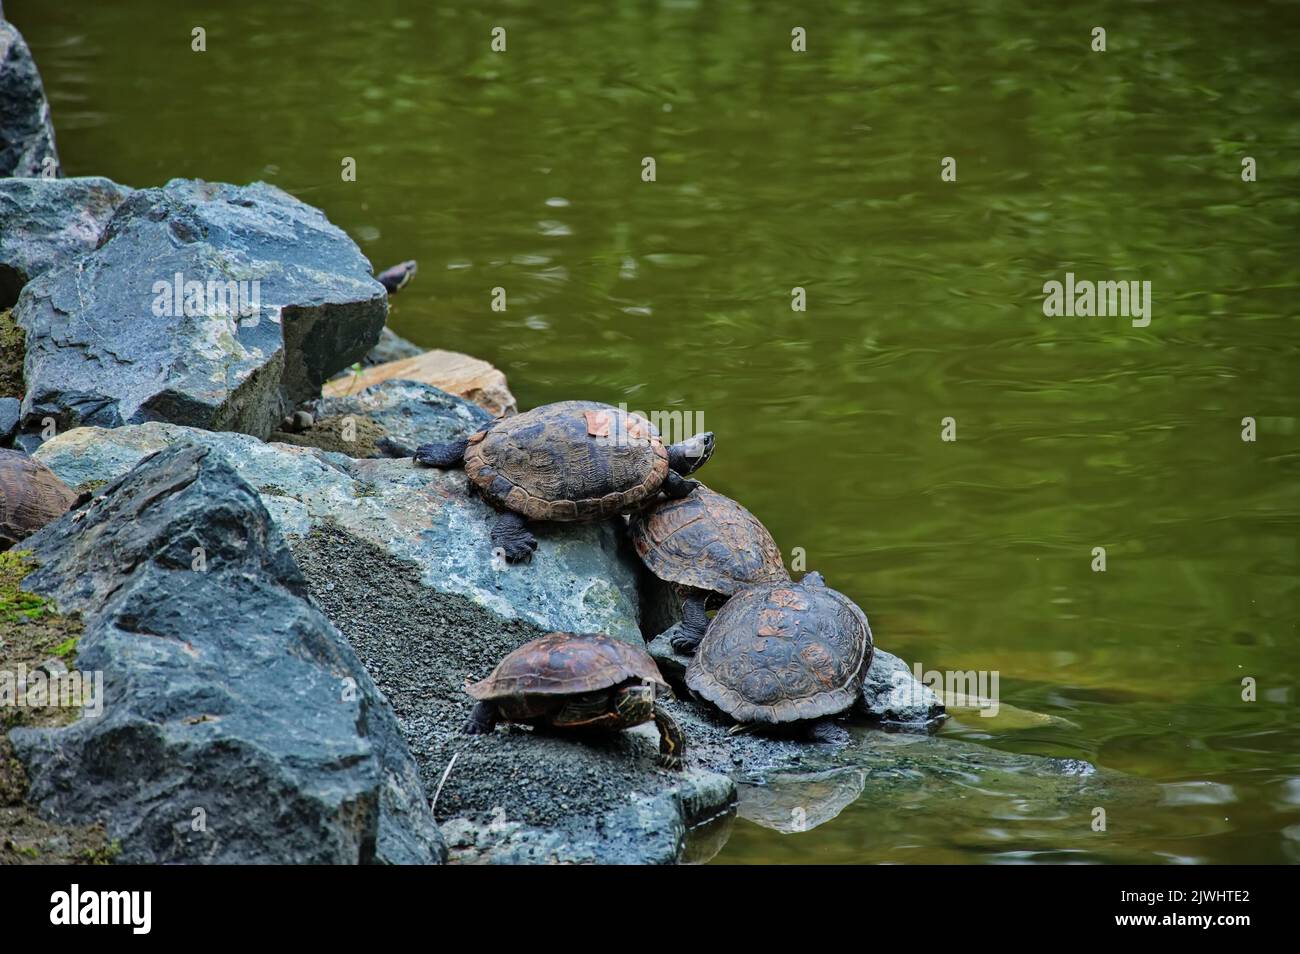 Group of turtles standing on the rock at the lake shore Stock Photo